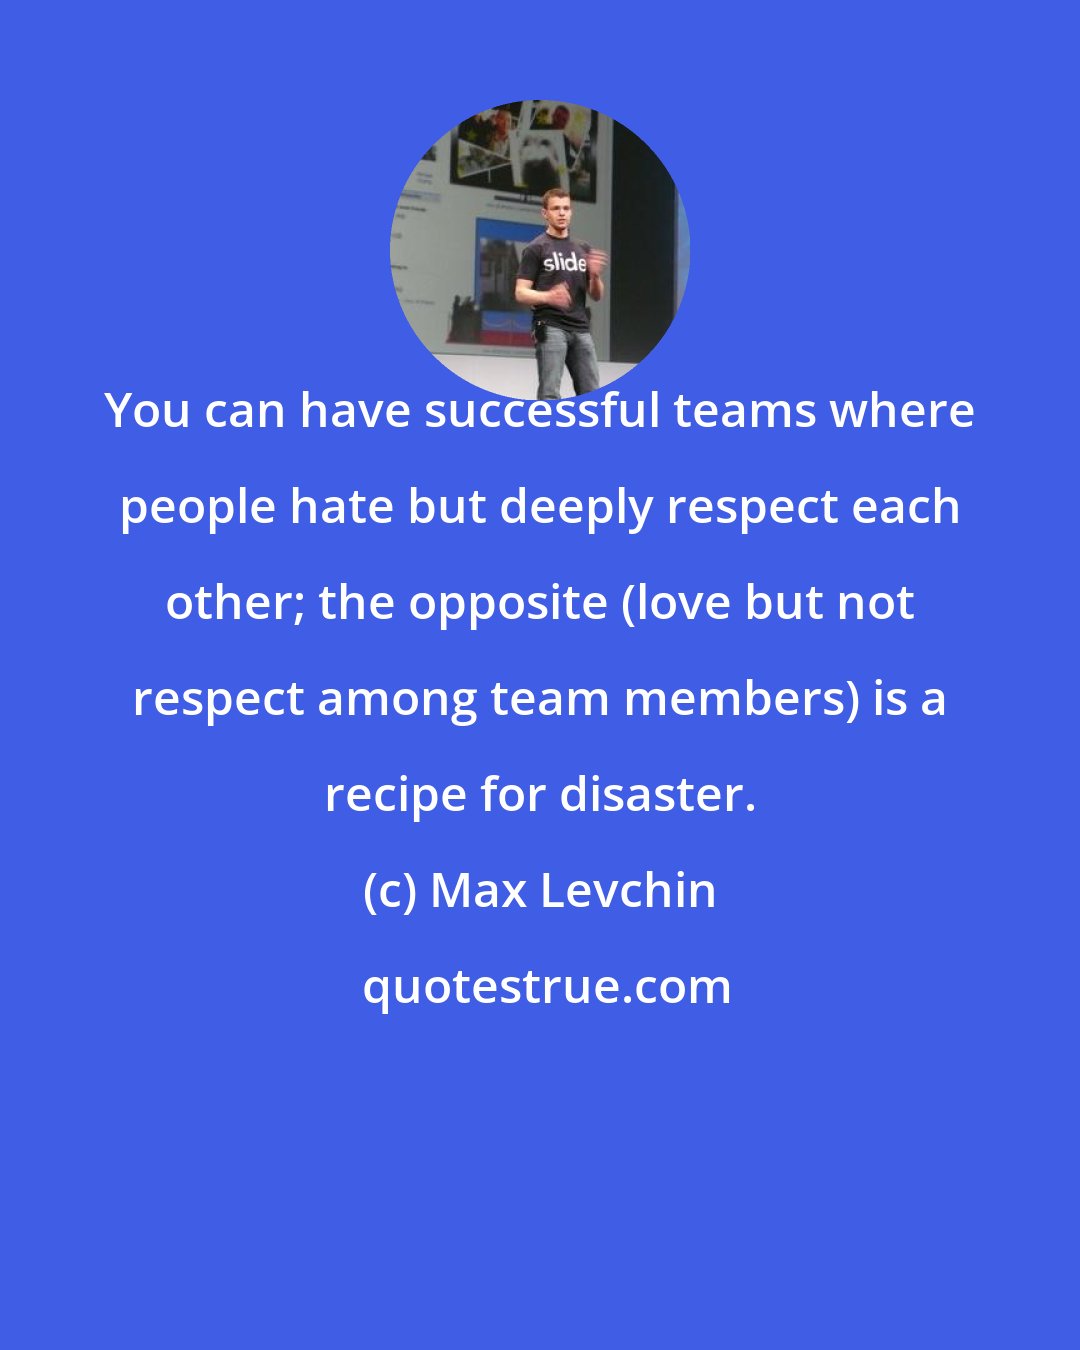 Max Levchin: You can have successful teams where people hate but deeply respect each other; the opposite (love but not respect among team members) is a recipe for disaster.